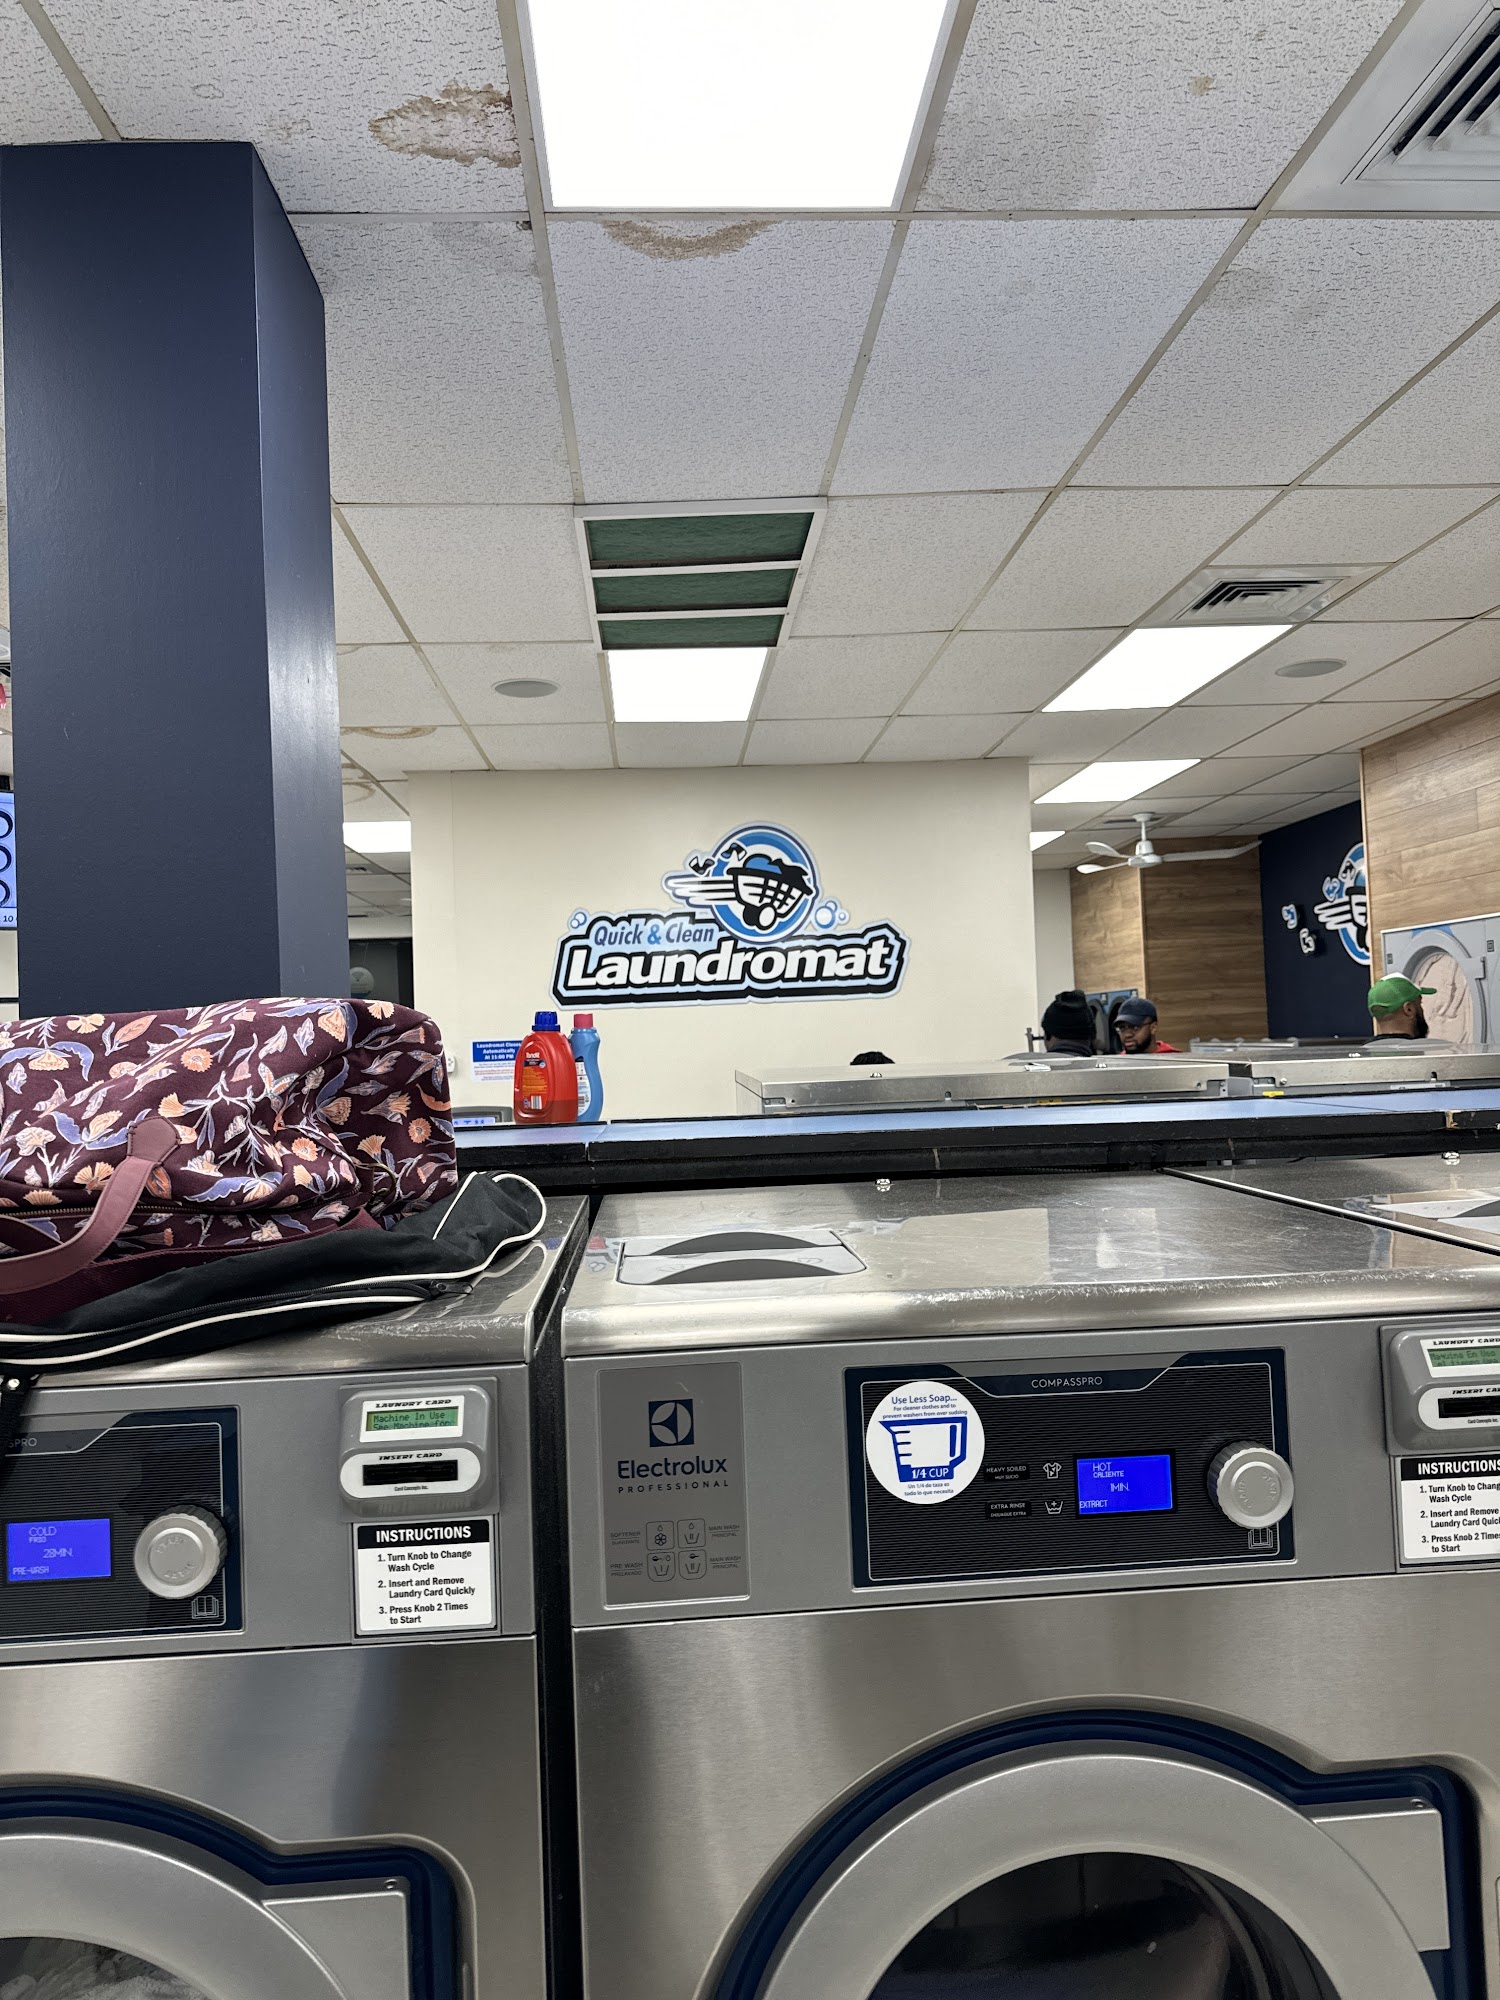 Quick and Clean Laundromat